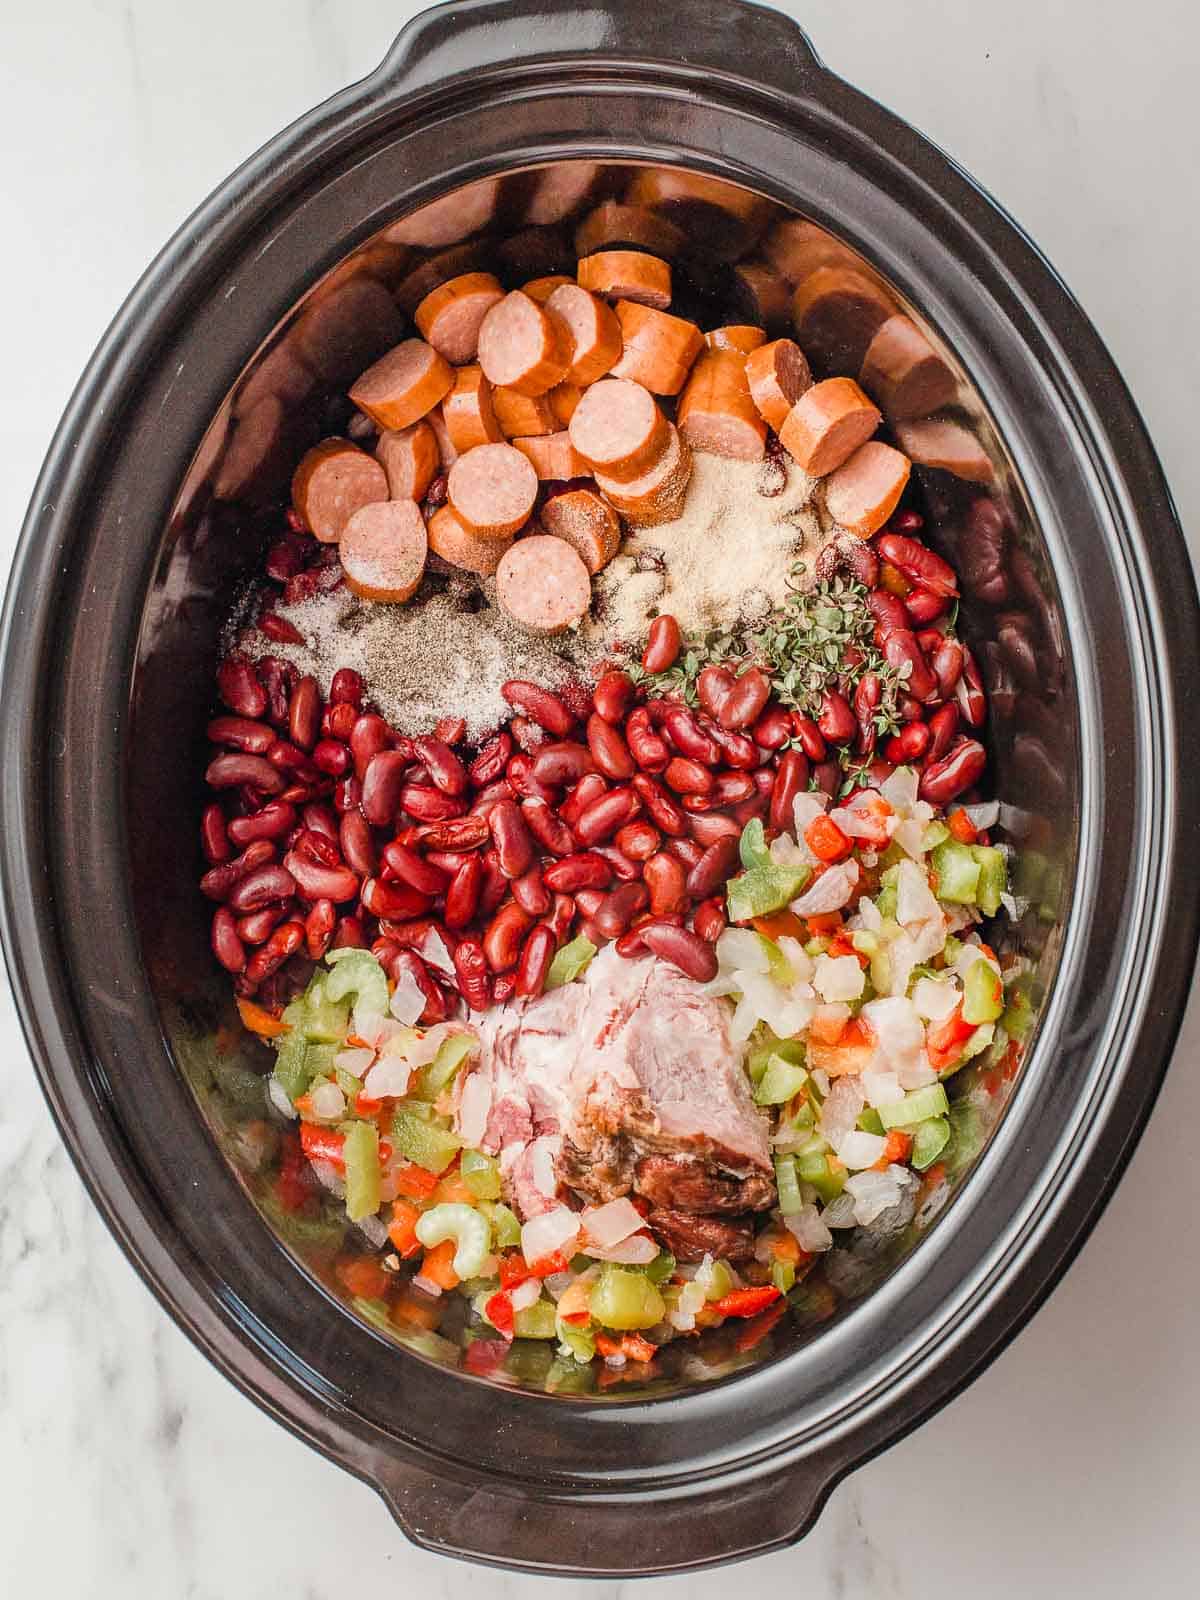 Red beans and rice ingredients in the slow cooker.